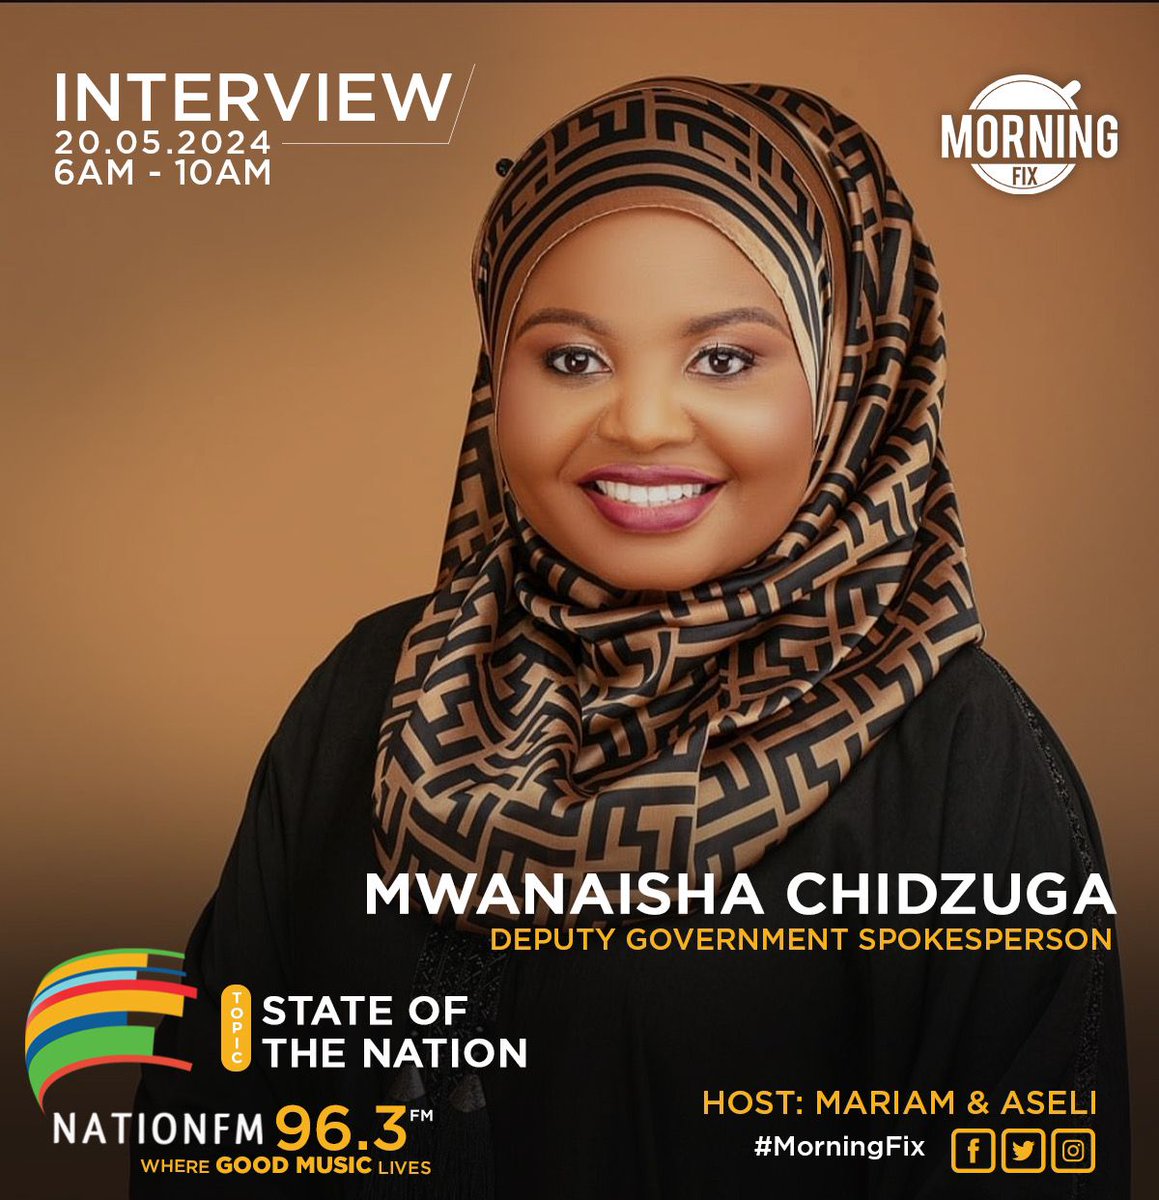 Get ready to tune in to your favorite morning show, #MorningFix, as we welcome Deputy Government Spokesperson, @M_Chidzuga, to the airwaves!

@brian_aseli